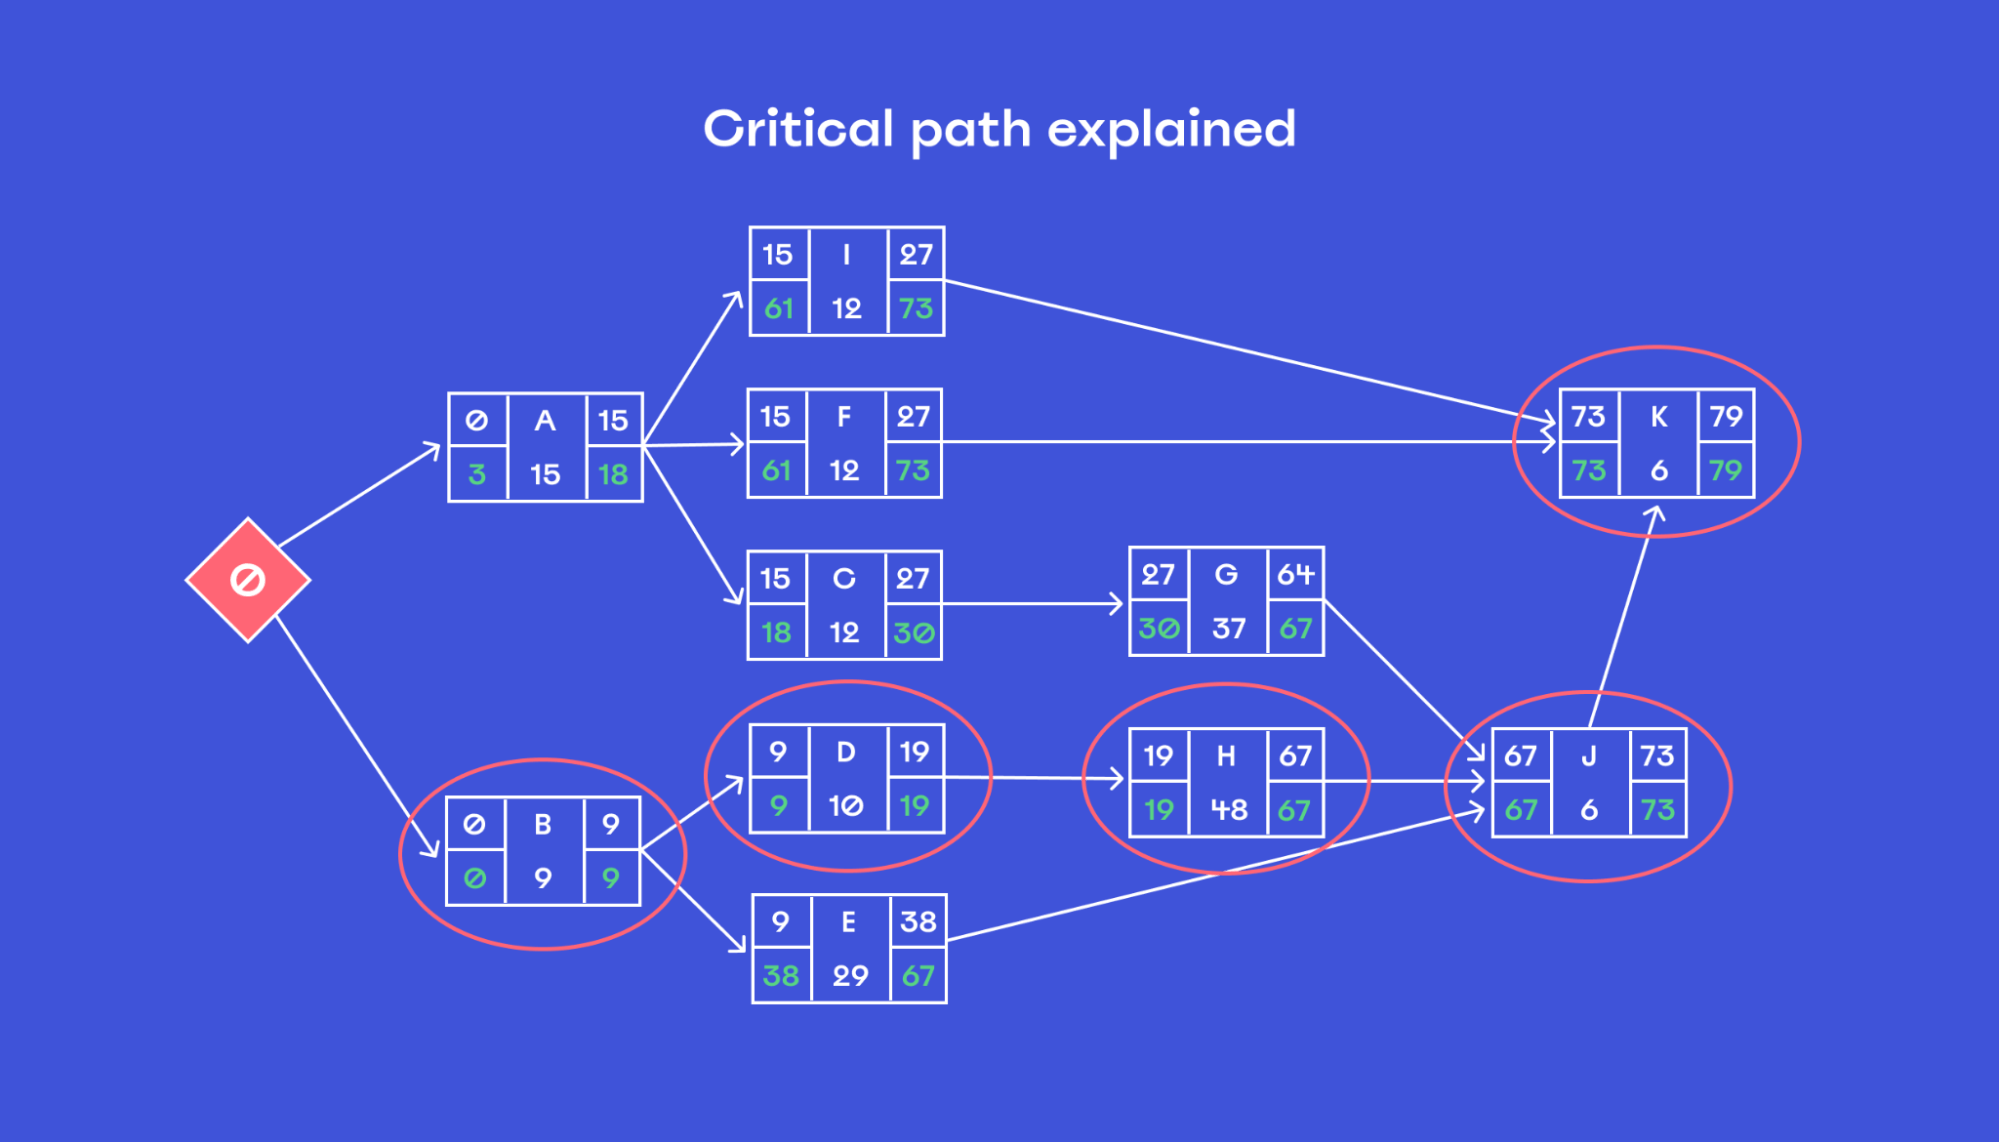 The critical path explained